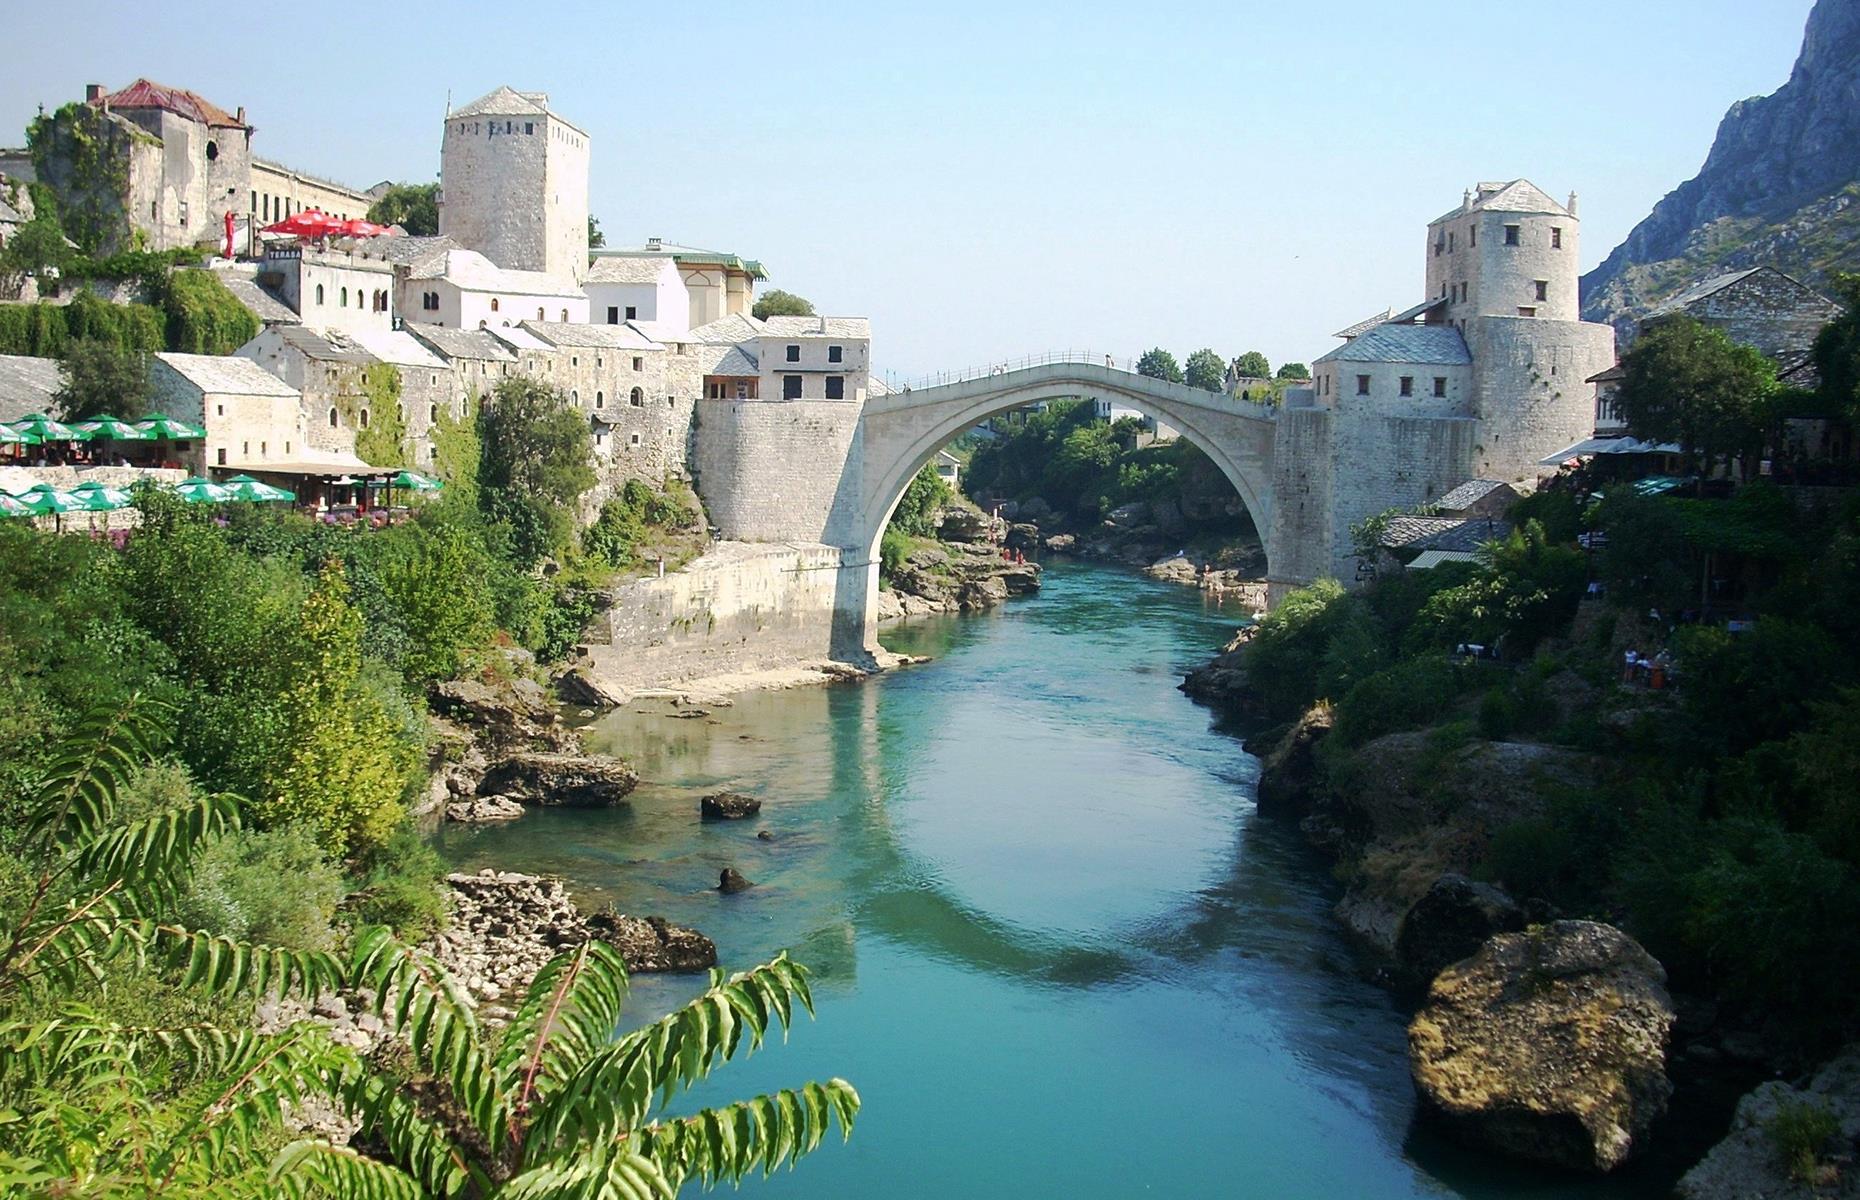 Stari Most – Mostar’s 16th-century bridge – had to be rebuilt after it was destroyed by Croatian forces in 1993 during the Bosnian War. You’d never know to look at it, though, and since its restoration in 2004, locals have carried on an old tradition of diving more than 65 feet into the Neretva River below. If you're holidaying in Croatia's Adriatic resorts, it's easy to fit in Mostar on a day trip.